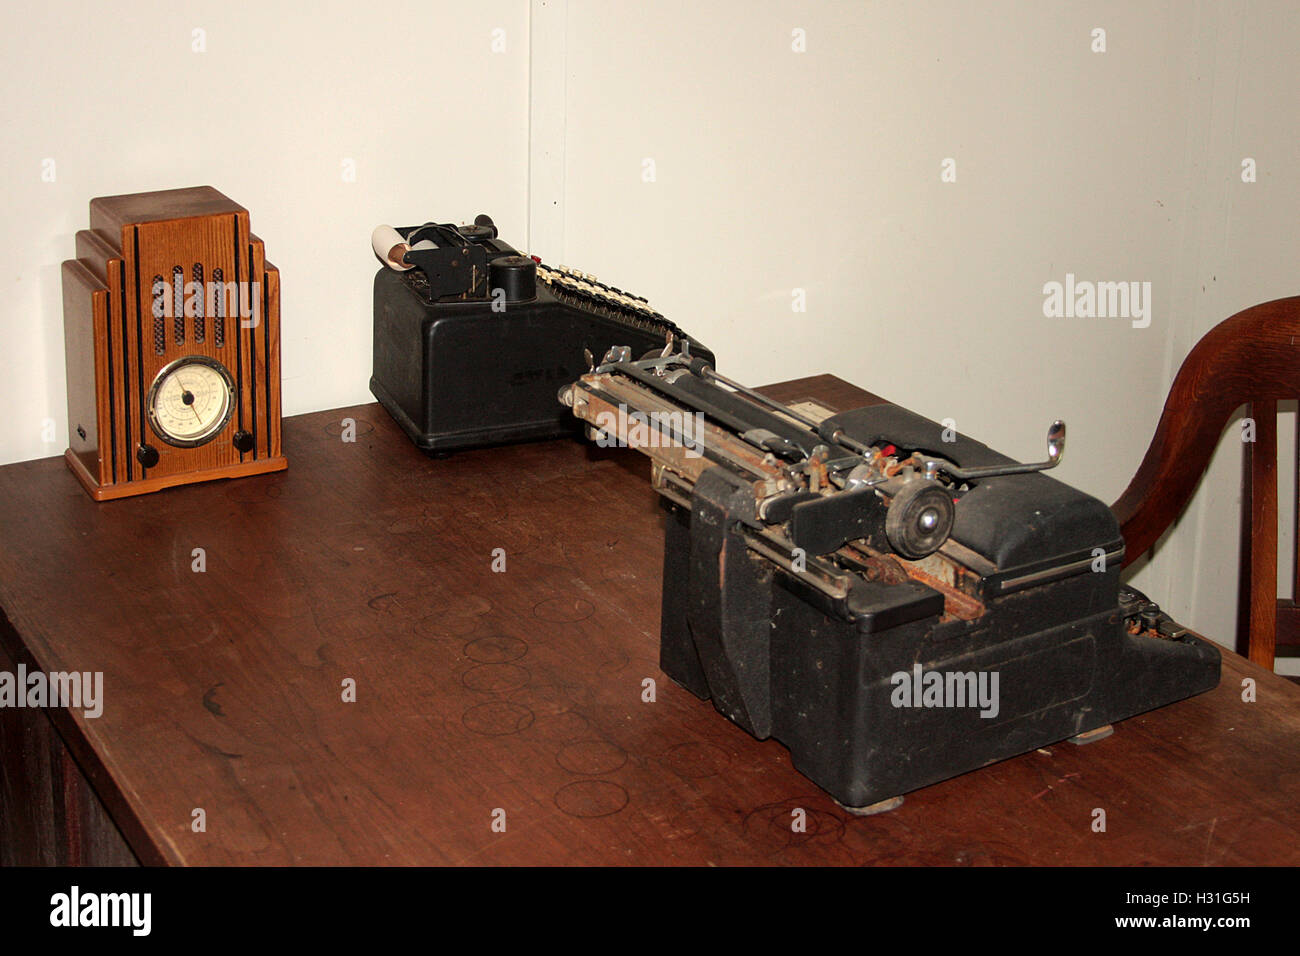 Old typewriters and small antique clock on desk Stock Photo